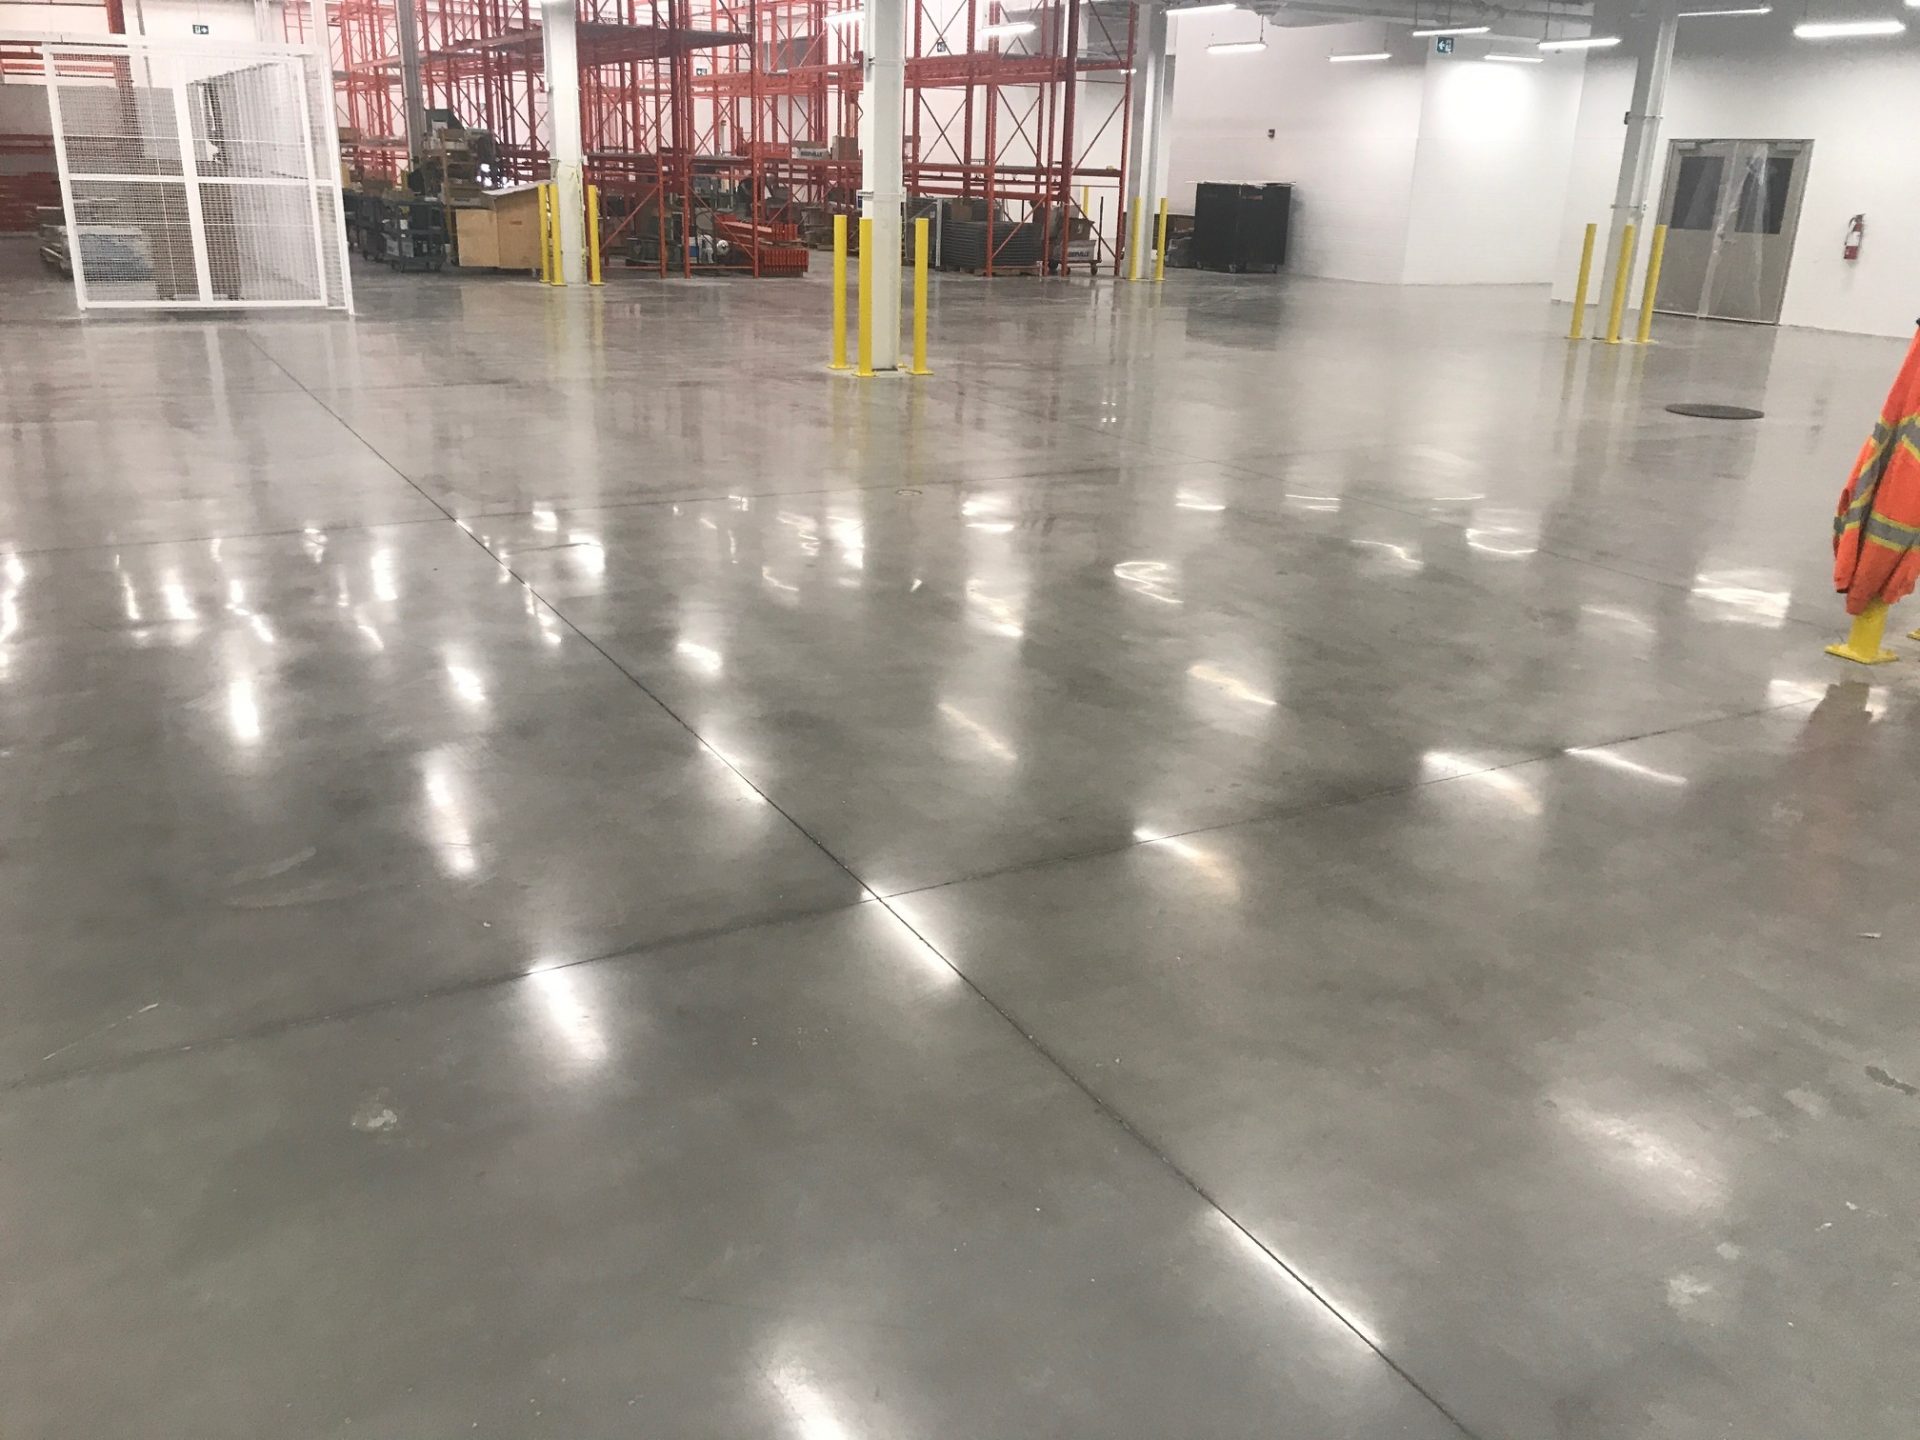 Canadian Blood Services - BTF Concrete Services - working with Bird Construction, 26,000 feet of polished concrete.